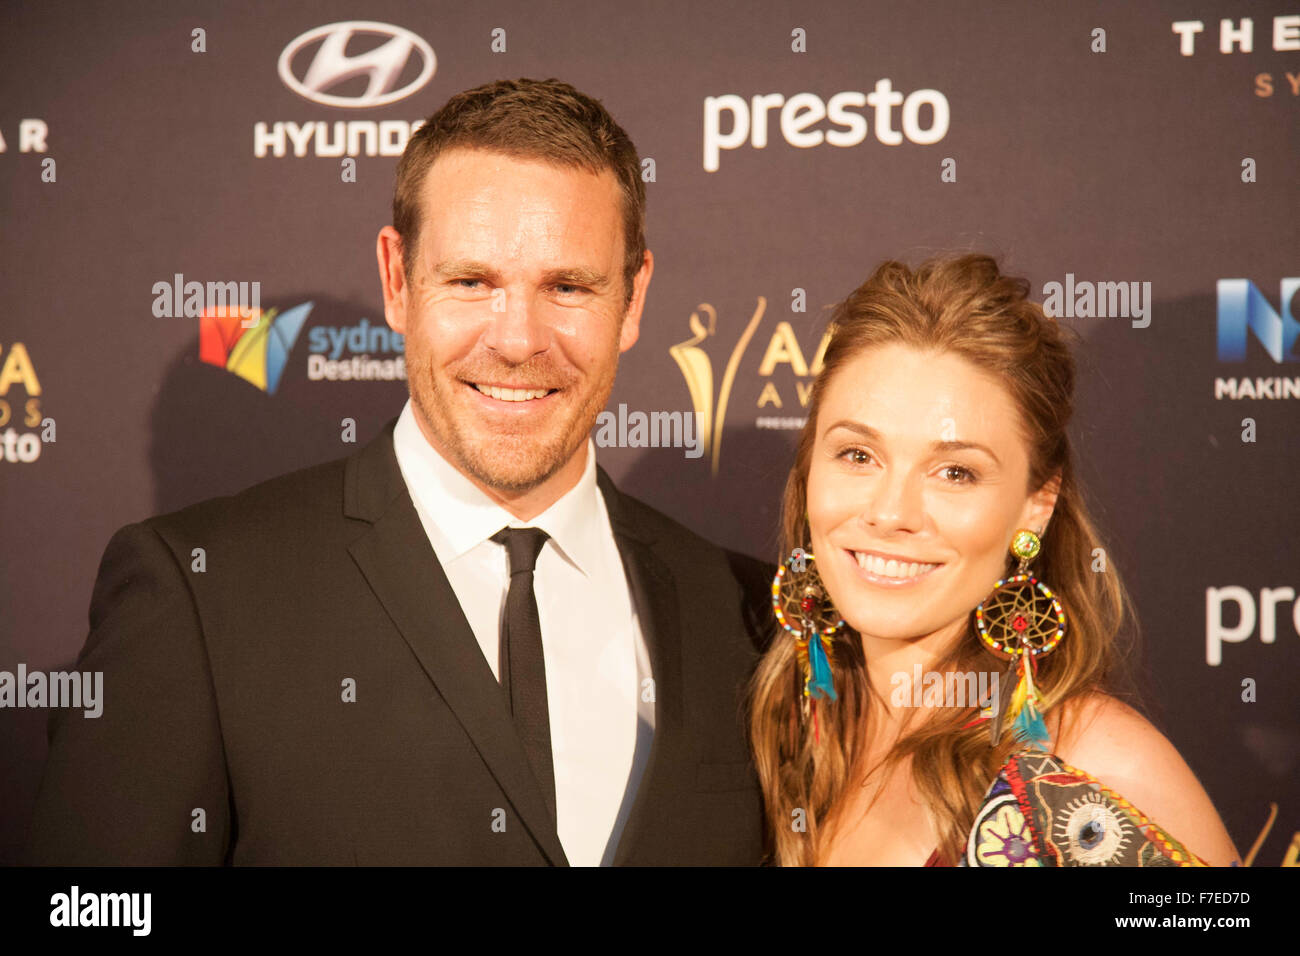 Sydney, Australia. 30th Nov, 2015. Aaron Jeffrey and Zoe Naylor arrive on the red carpet ahead of the 5th AACTA Awards Industry Dinner. The Australian Academy of Cinema and Television Arts Awards recognise screen excellence in Australia. Credit:  model10/Alamy Live News Stock Photo